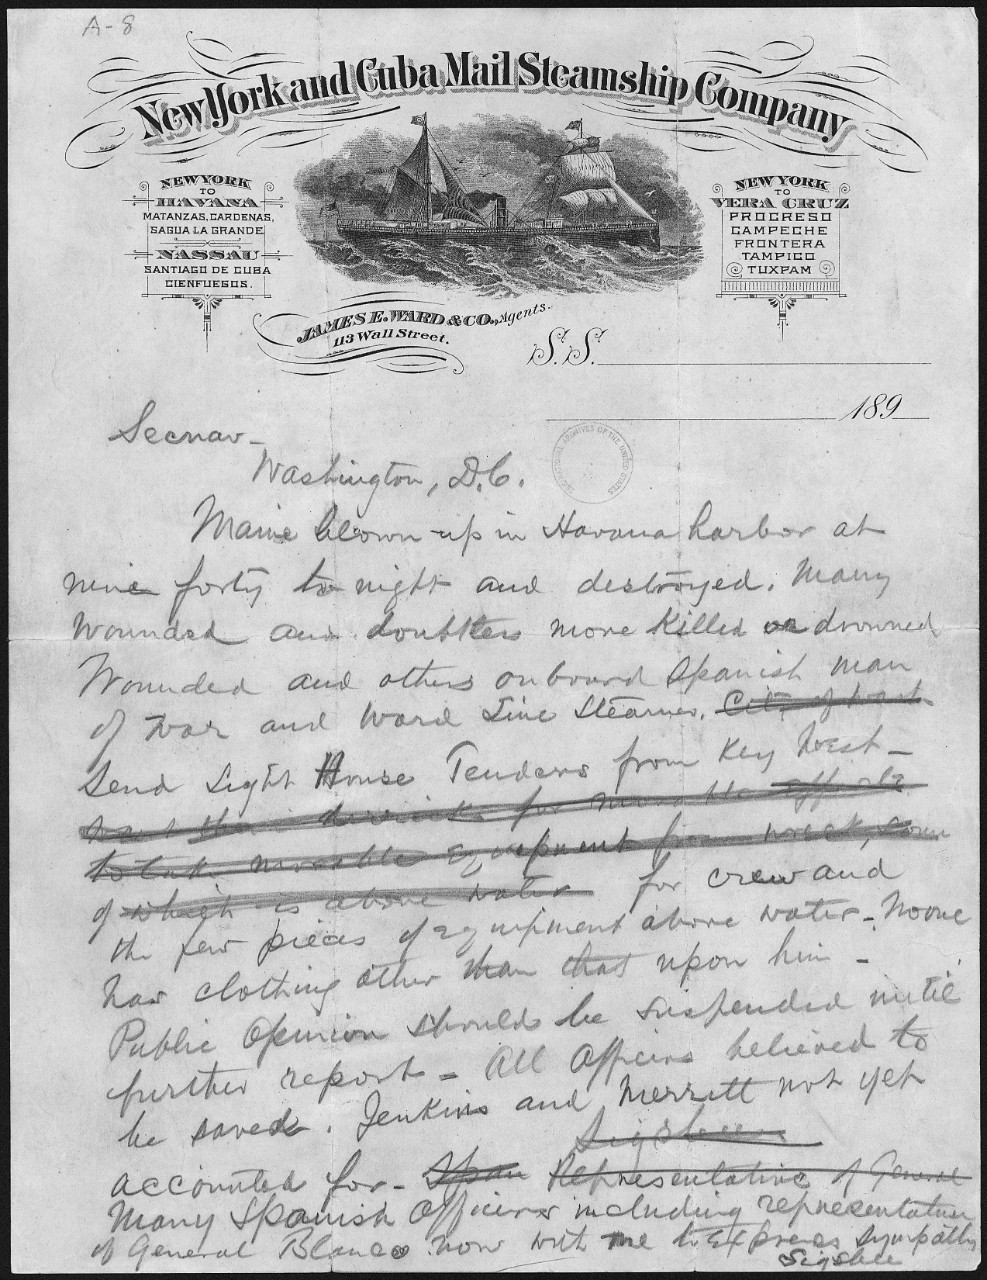  A copy of th telegram from Capt. Charles D. Sigsbee to the Secretary of Navy announcing the destruction of U.S.S. Maine